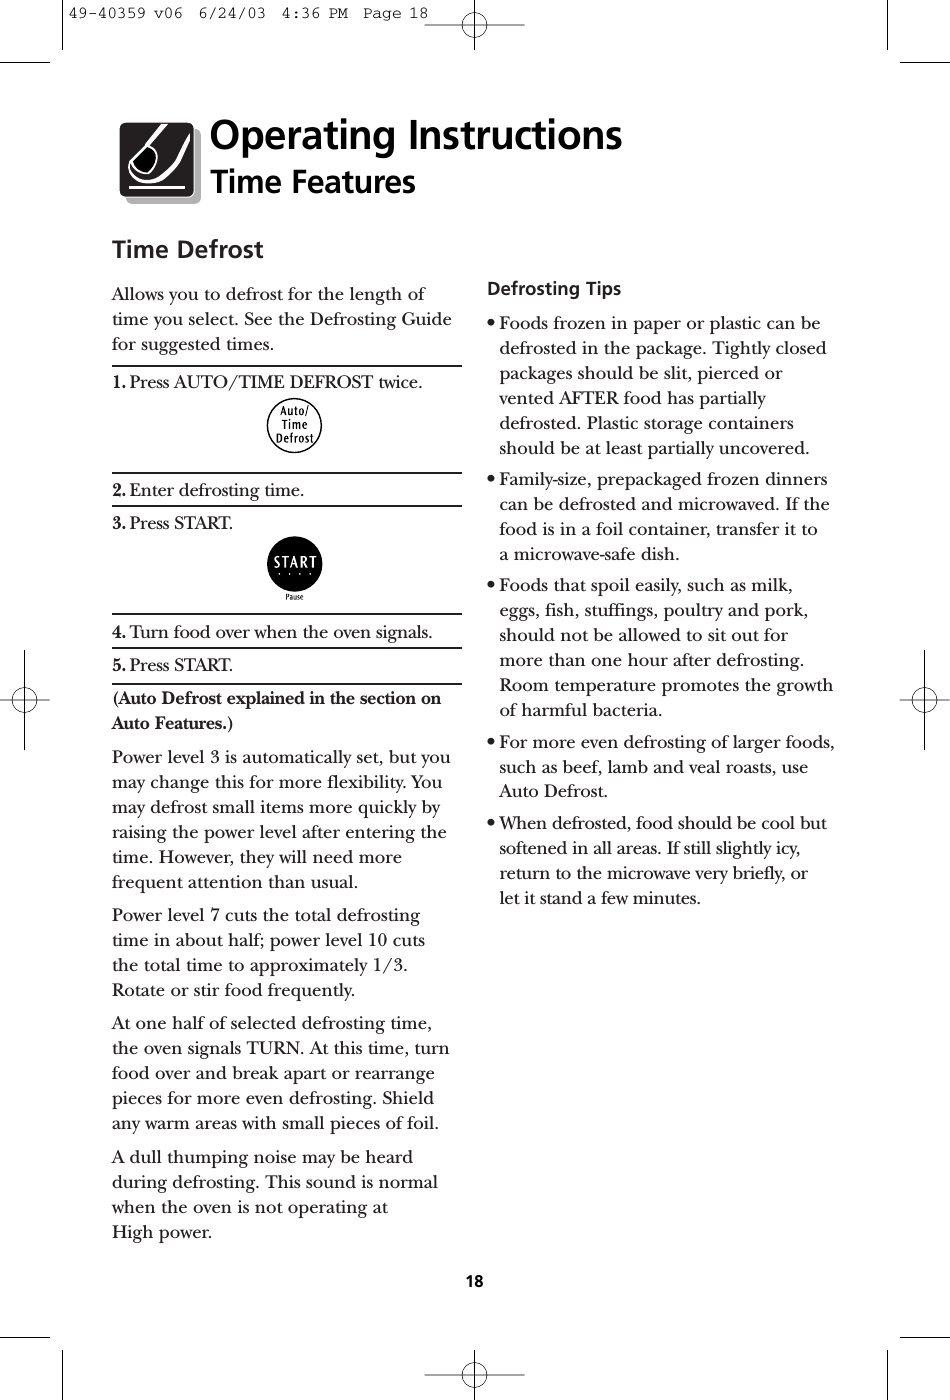 Time DefrostAllows you to defrost for the length oftime you select. See the Defrosting Guidefor suggested times.1. Press AUTO/TIME DEFROST twice.2. Enter defrosting time.3. Press START. 4. Turn food over when the oven signals.5. Press START. (Auto Defrost explained in the section onAuto Features.)Power level 3 is automatically set, but youmay change this for more flexibility. Youmay defrost small items more quickly byraising the power level after entering thetime. However, they will need morefrequent attention than usual.Power level 7 cuts the total defrostingtime in about half; power level 10 cuts the total time to approximately 1/3.Rotate or stir food frequently. At one half of selected defrosting time,the oven signals TURN. At this time, turnfood over and break apart or rearrangepieces for more even defrosting. Shieldany warm areas with small pieces of foil.A dull thumping noise may be heardduring defrosting. This sound is normalwhen the oven is not operating at High power.Defrosting Tips•Foods frozen in paper or plastic can bedefrosted in the package. Tightly closedpackages should be slit, pierced orvented AFTER food has partiallydefrosted. Plastic storage containersshould be at least partially uncovered.•Family-size, prepackaged frozen dinnerscan be defrosted and microwaved. If thefood is in a foil container, transfer it to a microwave-safe dish.•Foods that spoil easily, such as milk,eggs, fish, stuffings, poultry and pork,should not be allowed to sit out formore than one hour after defrosting.Room temperature promotes the growthof harmful bacteria.•For more even defrosting of larger foods,such as beef, lamb and veal roasts, useAuto Defrost.•When defrosted, food should be cool butsoftened in all areas. If still slightly icy,return to the microwave very briefly, or let it stand a few minutes.18Operating InstructionsTime Features49-40359 v06  6/24/03  4:36 PM  Page 18